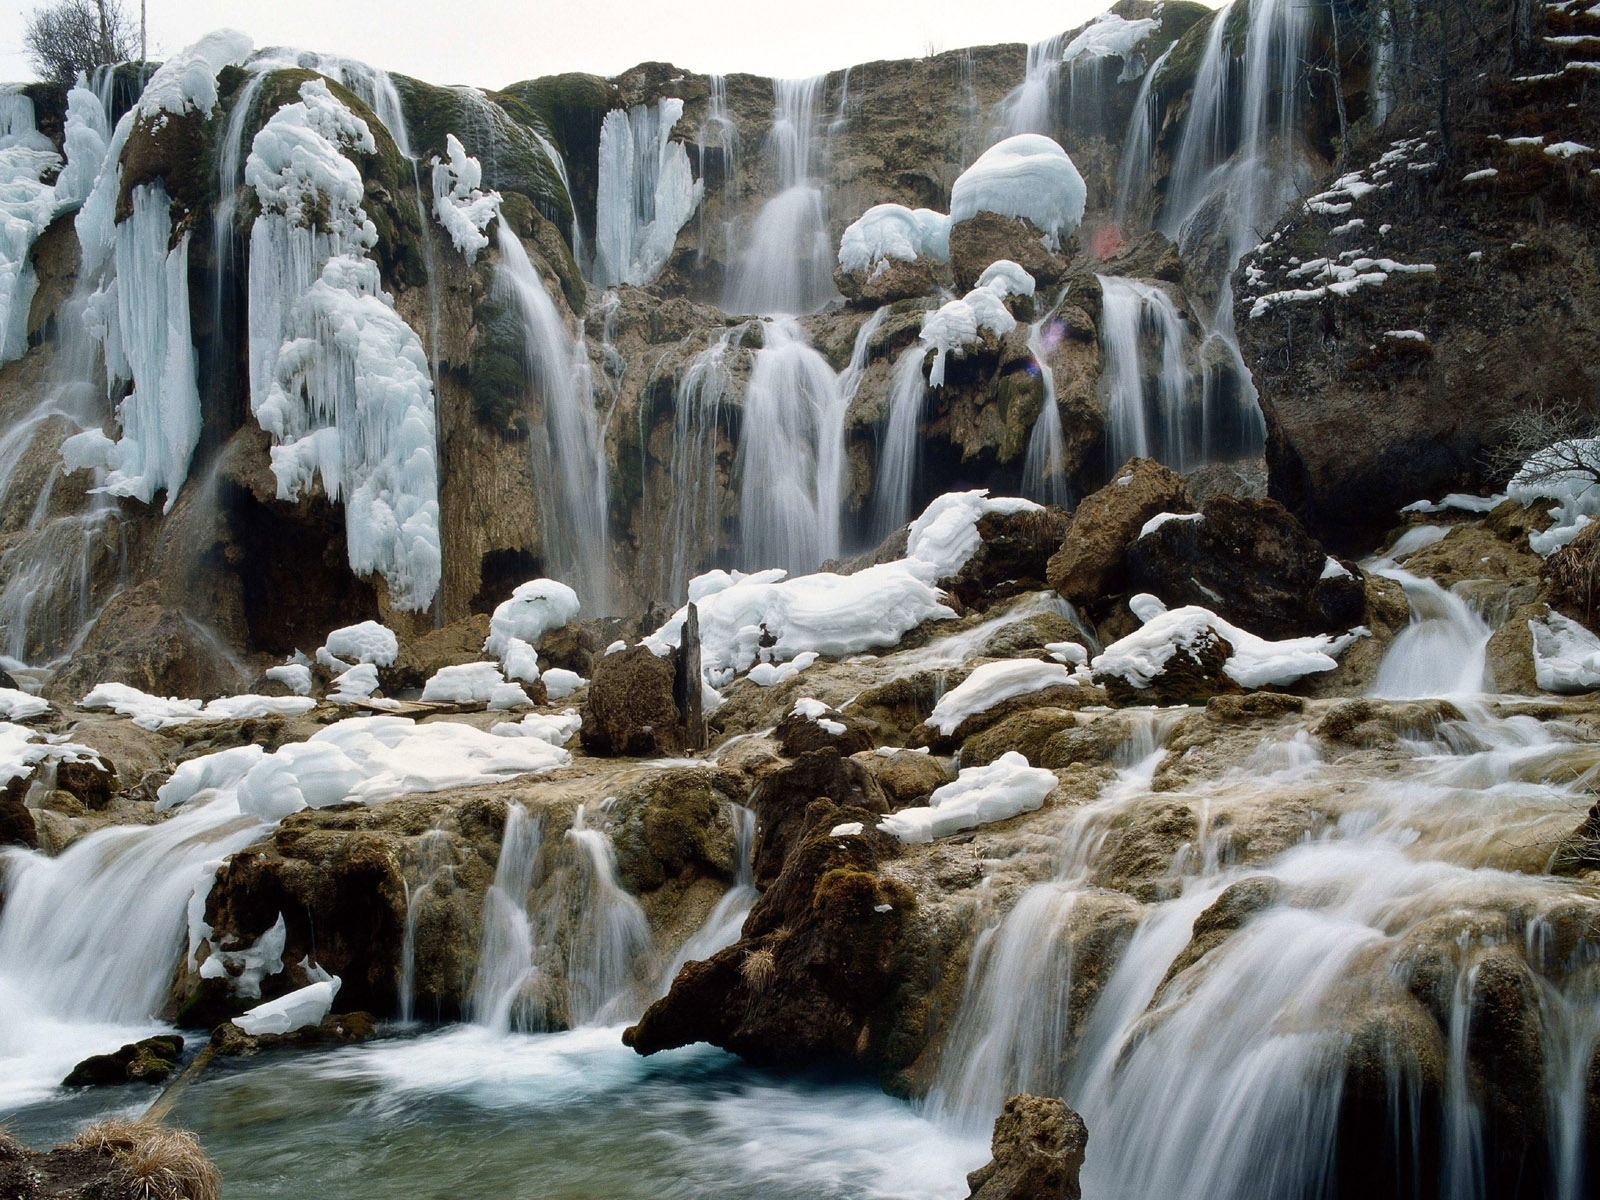 earth, winter, cold, frozen, nature, water, waterfall